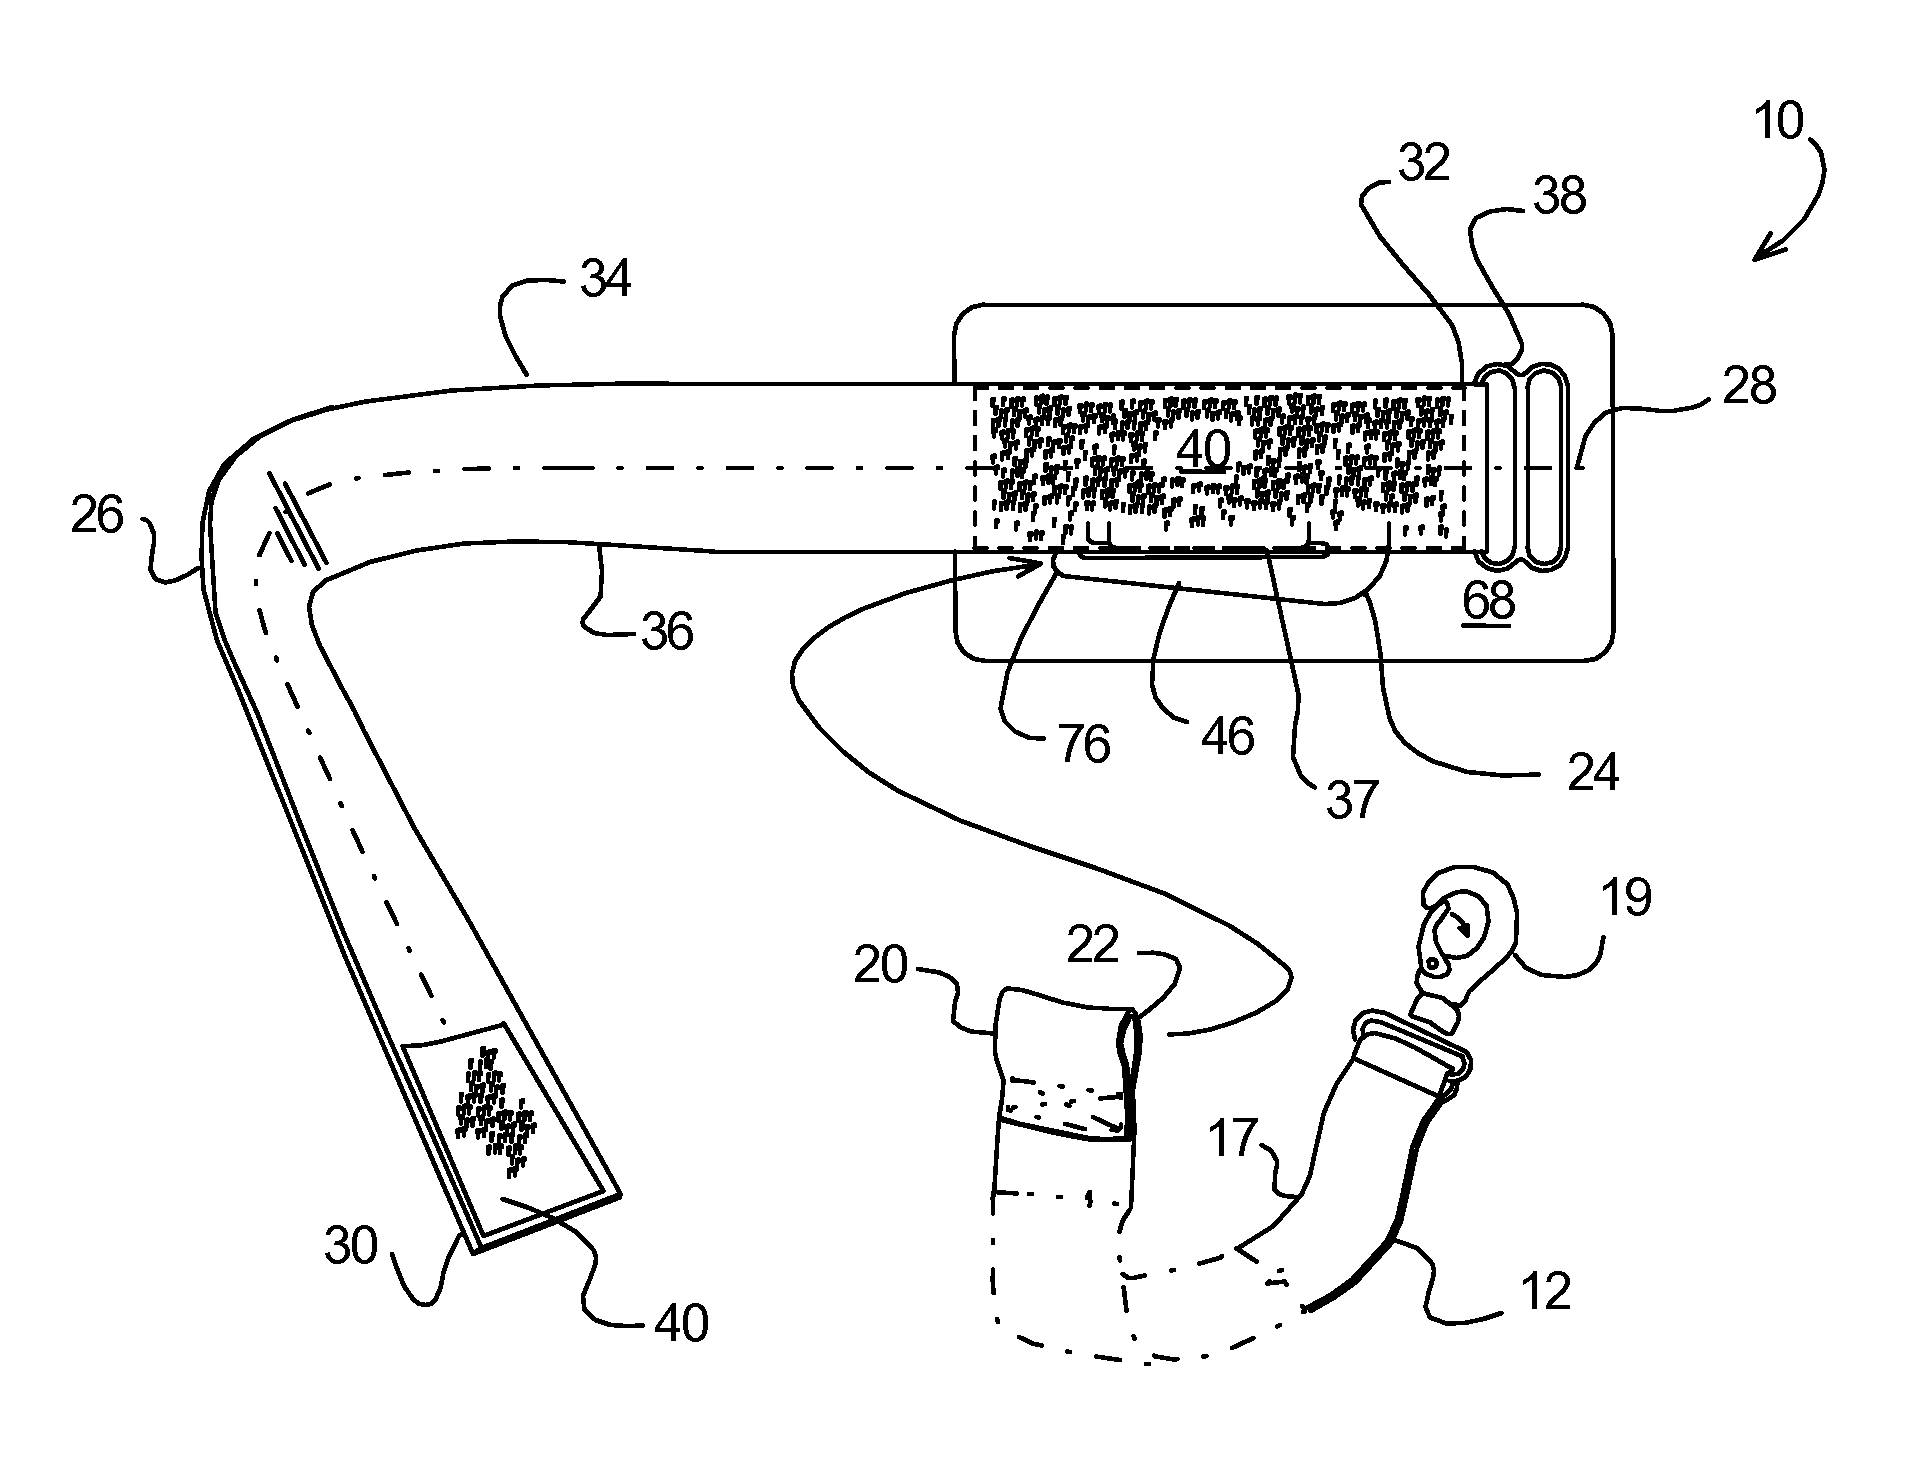 Weight lifting strap with equipment engagement system